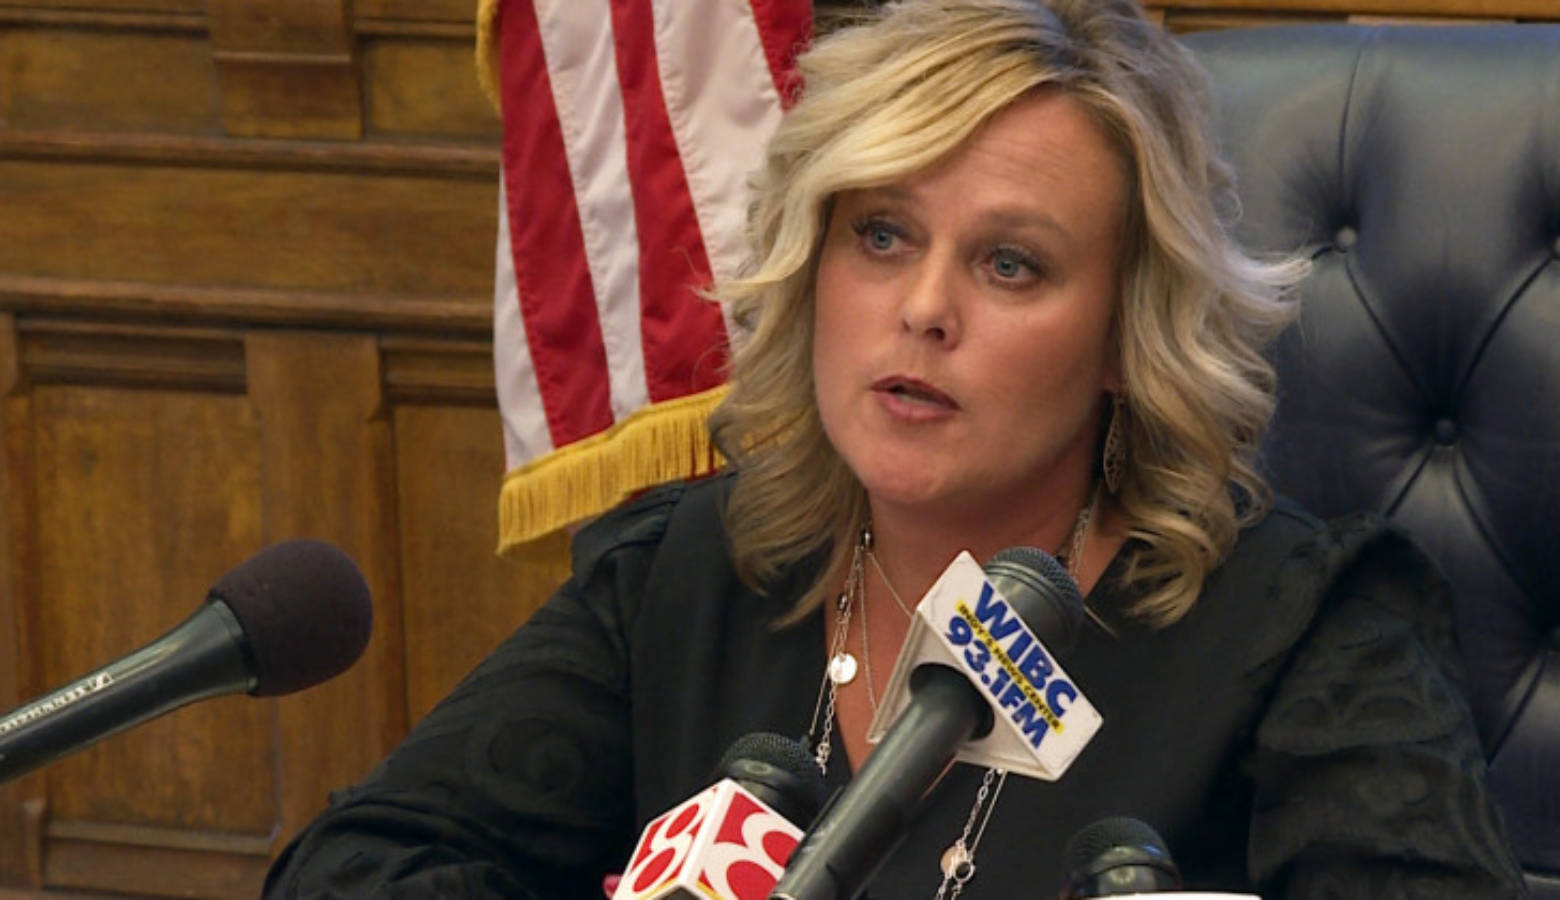 Jennifer McCormick will not run for re-election as state superintendent of public instruction. The position will move from general election to assigned by the governor.